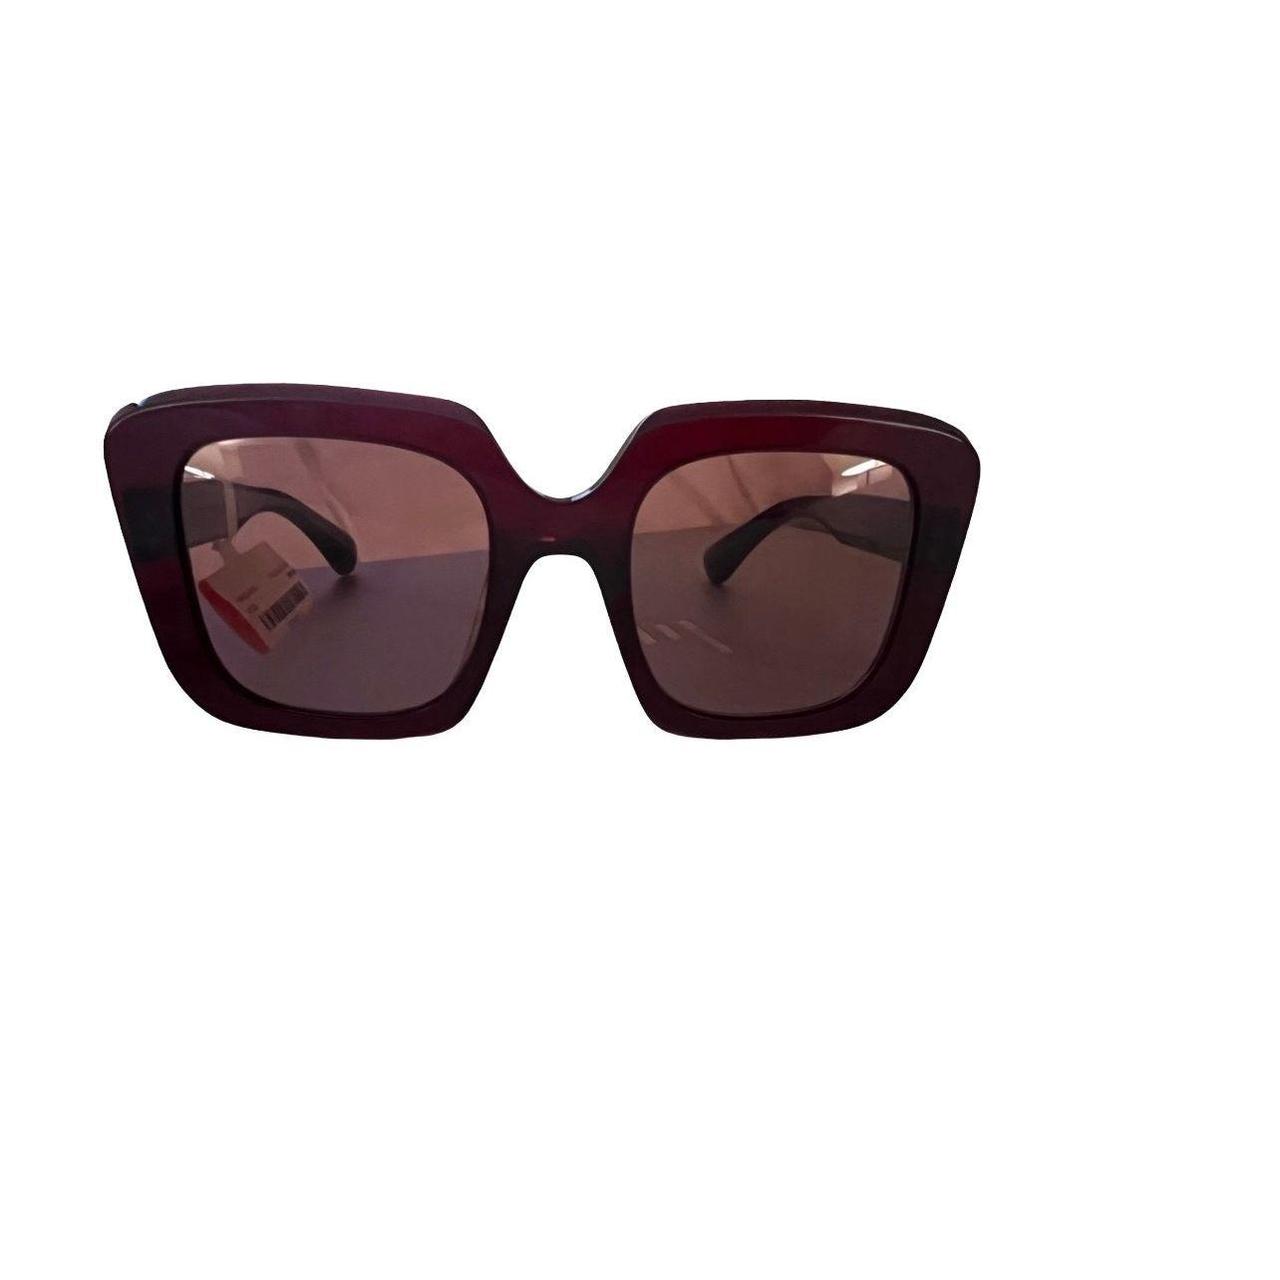 Oliver Peoples Women's Brown and Red Sunglasses (2)